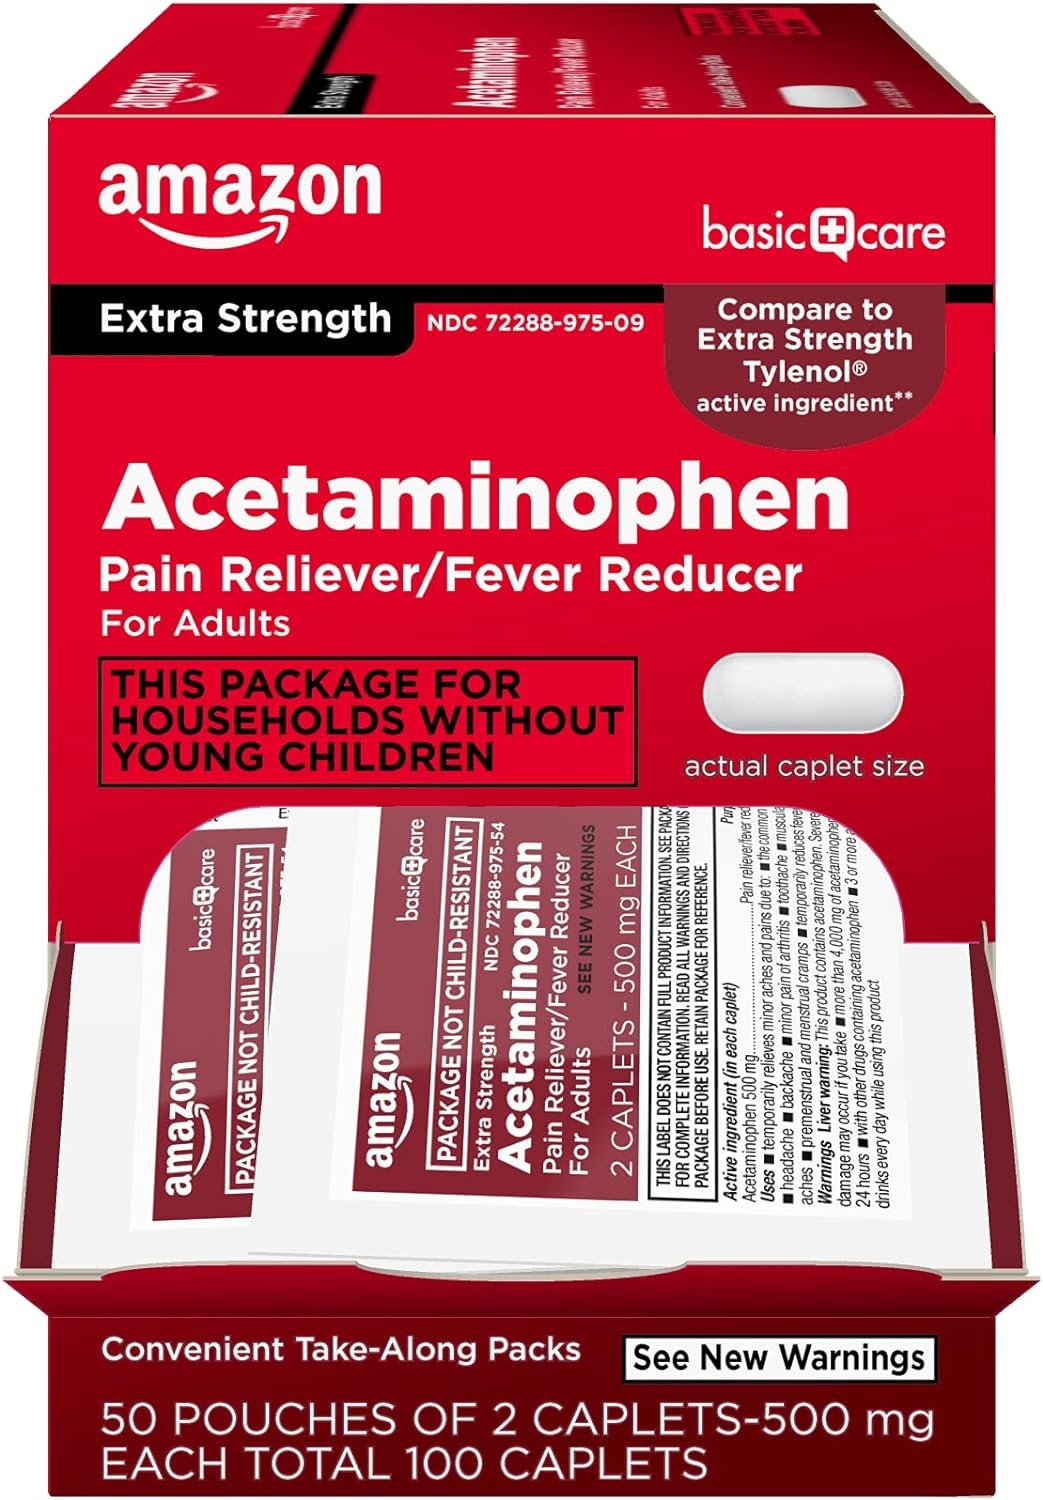 Basic Care Extra Strength Acetaminophen Caplets 500 mg, Pain Reliever and Fever Reducer, Easy Open Cap, 100 Count